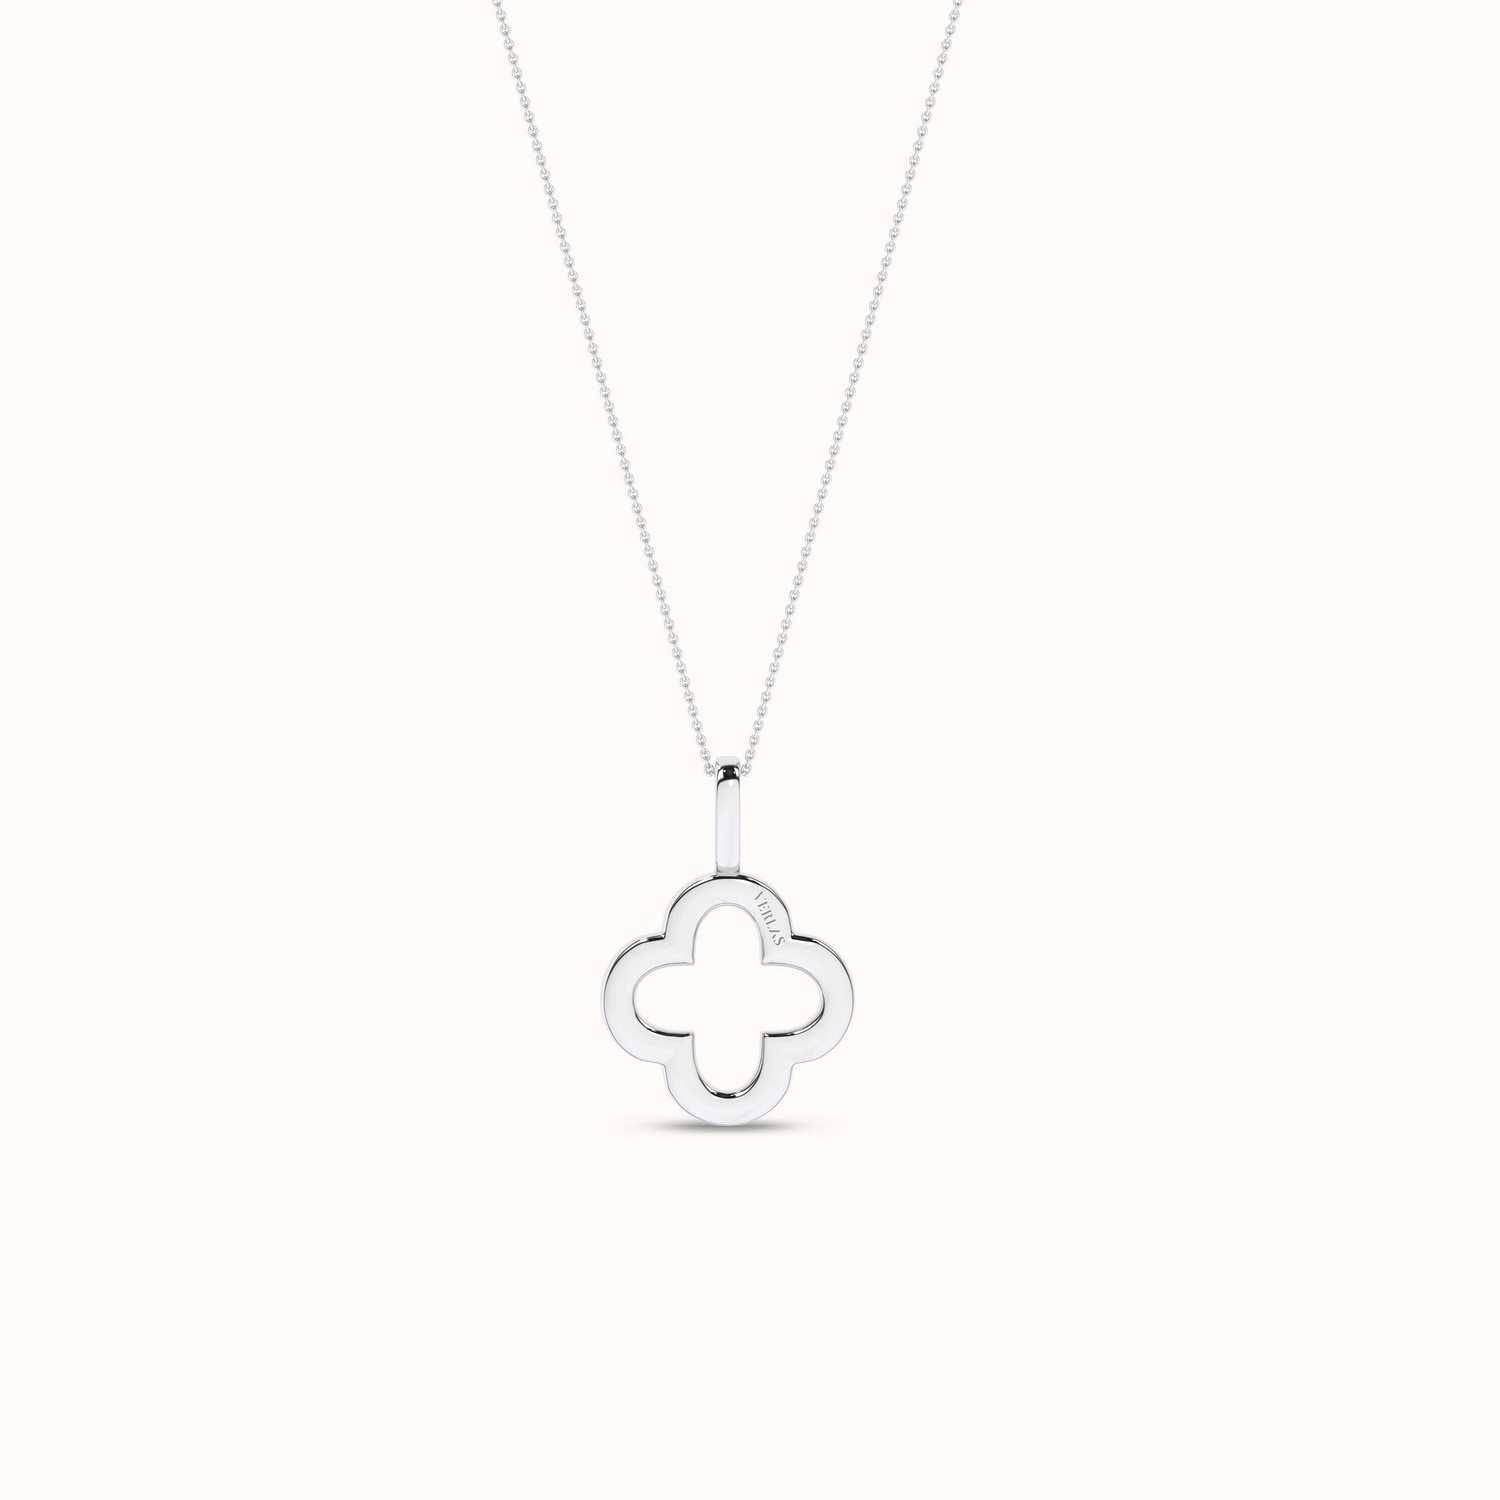 Clover Silhouette Drop Necklace_Product Angle_1/5Ct. - 3